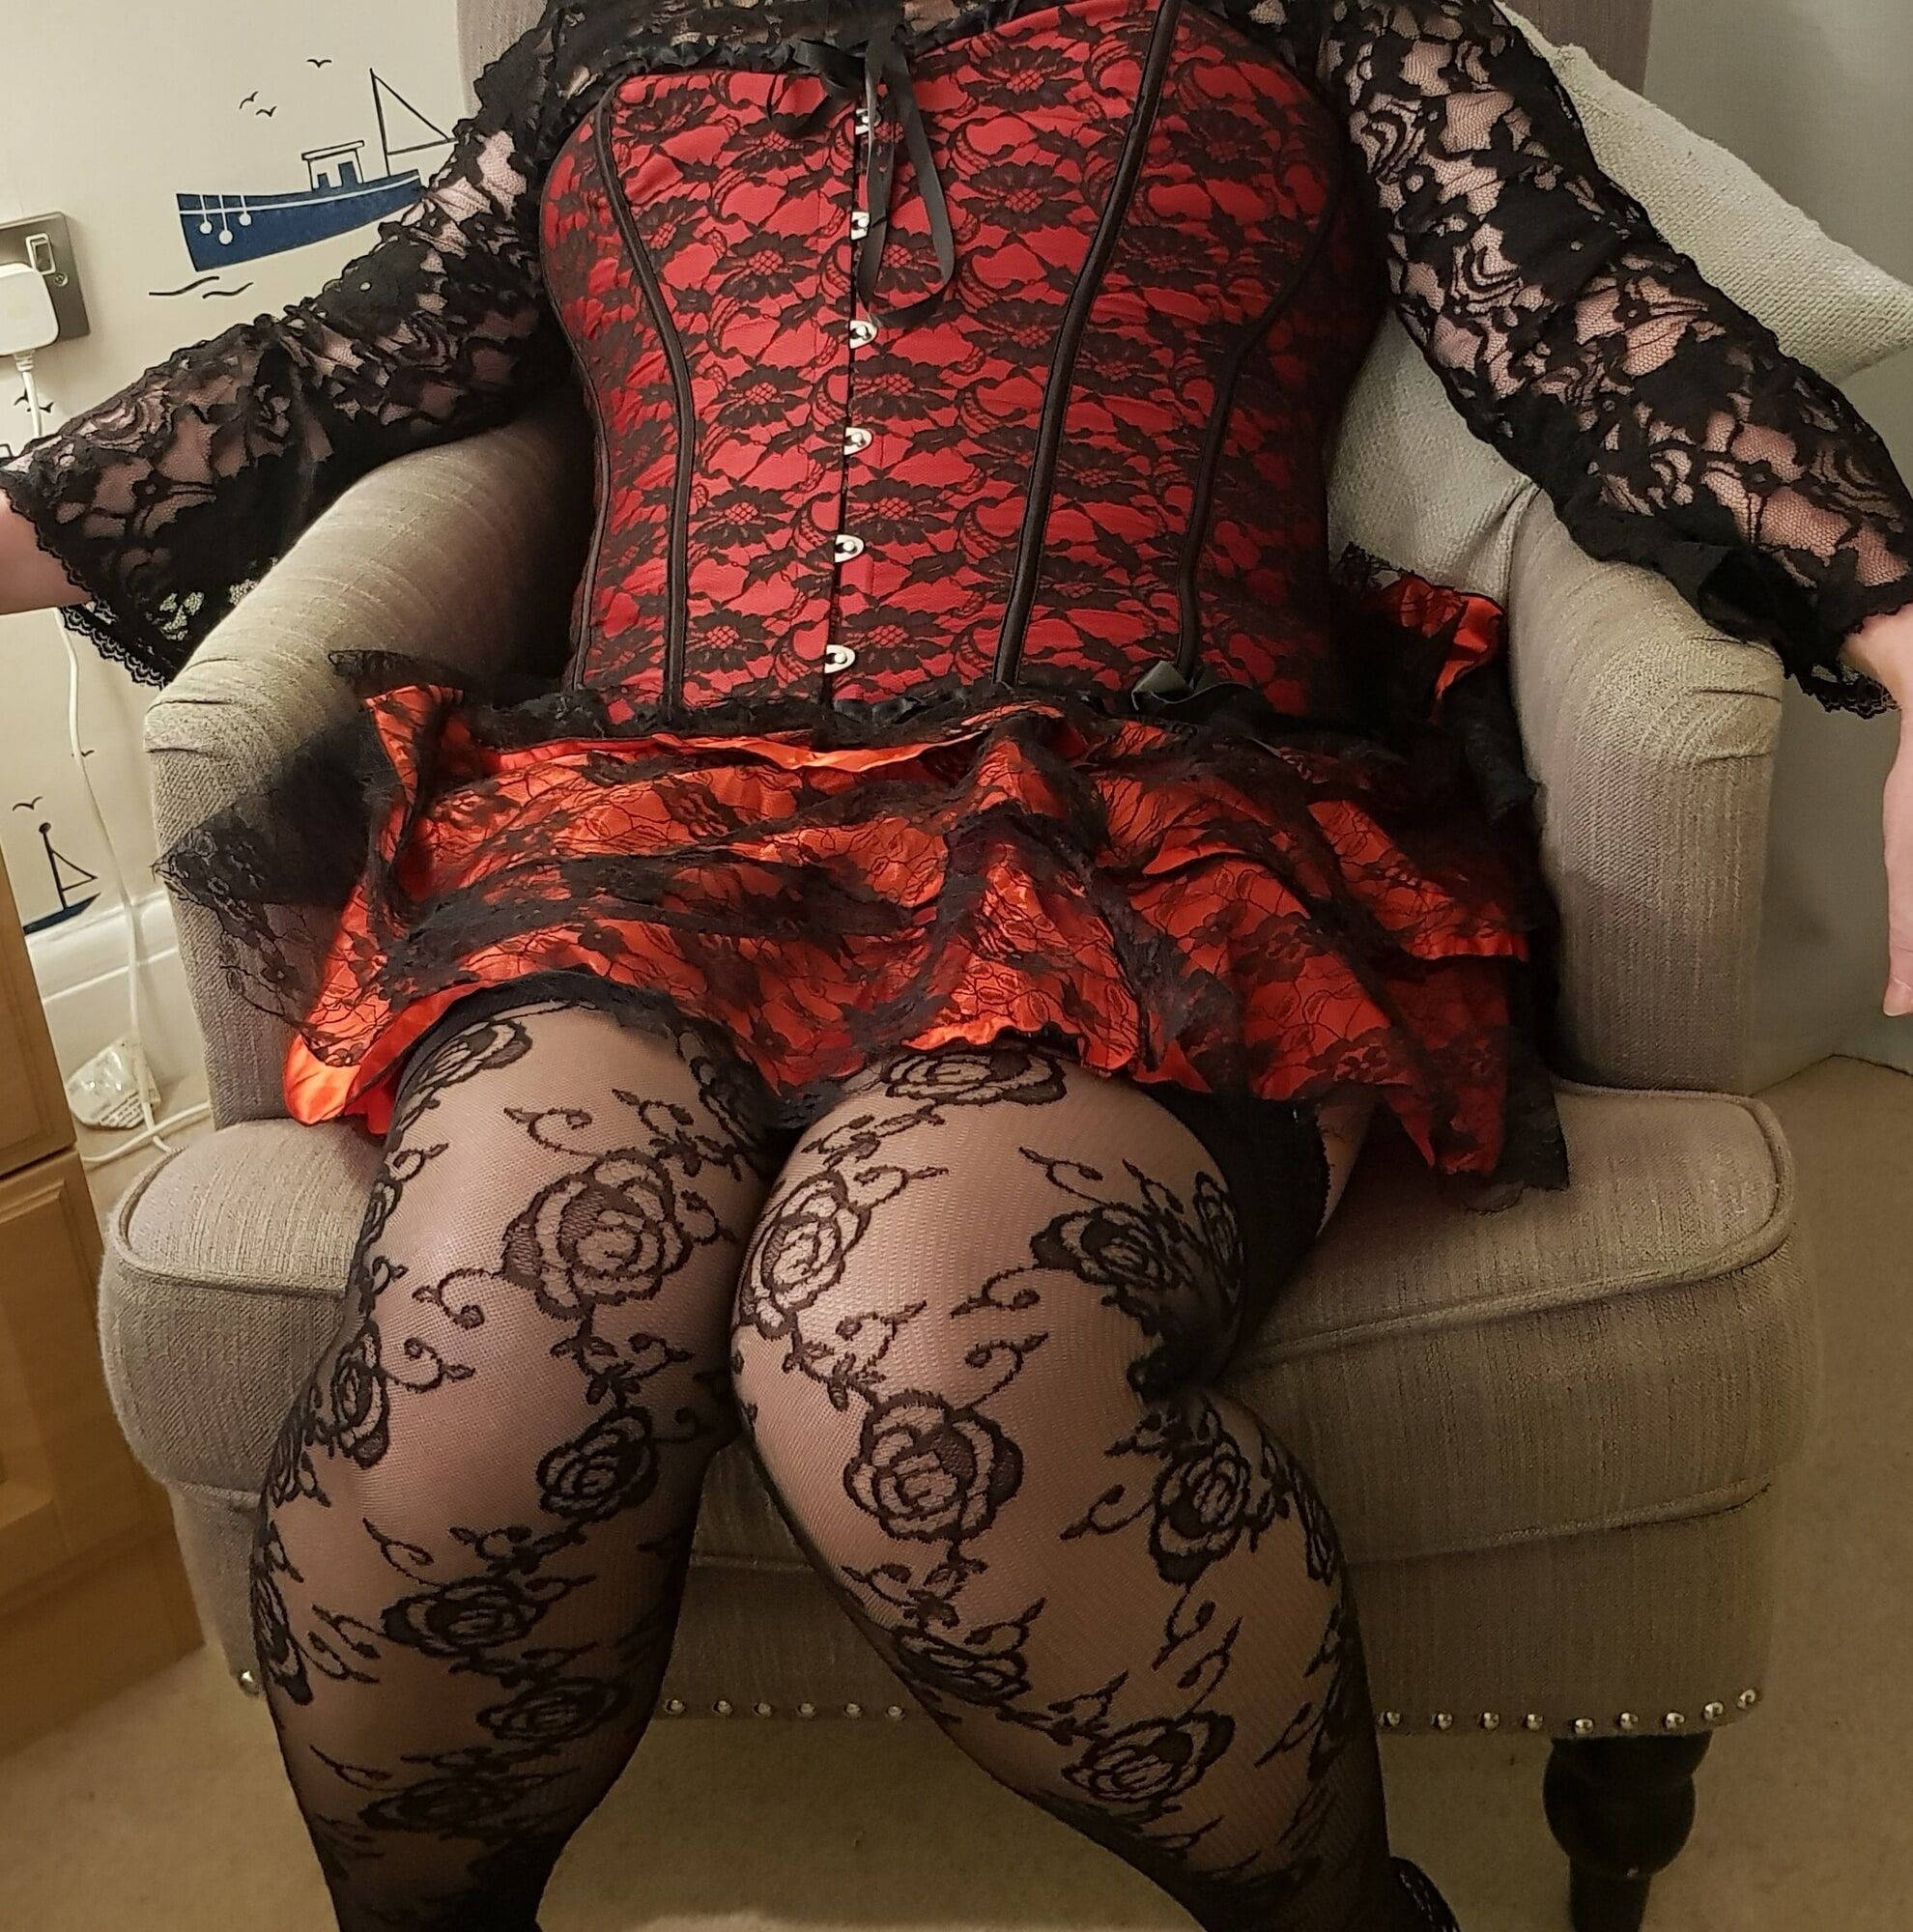 Crossdressing in floral lace lingerie, skirt and heels #11